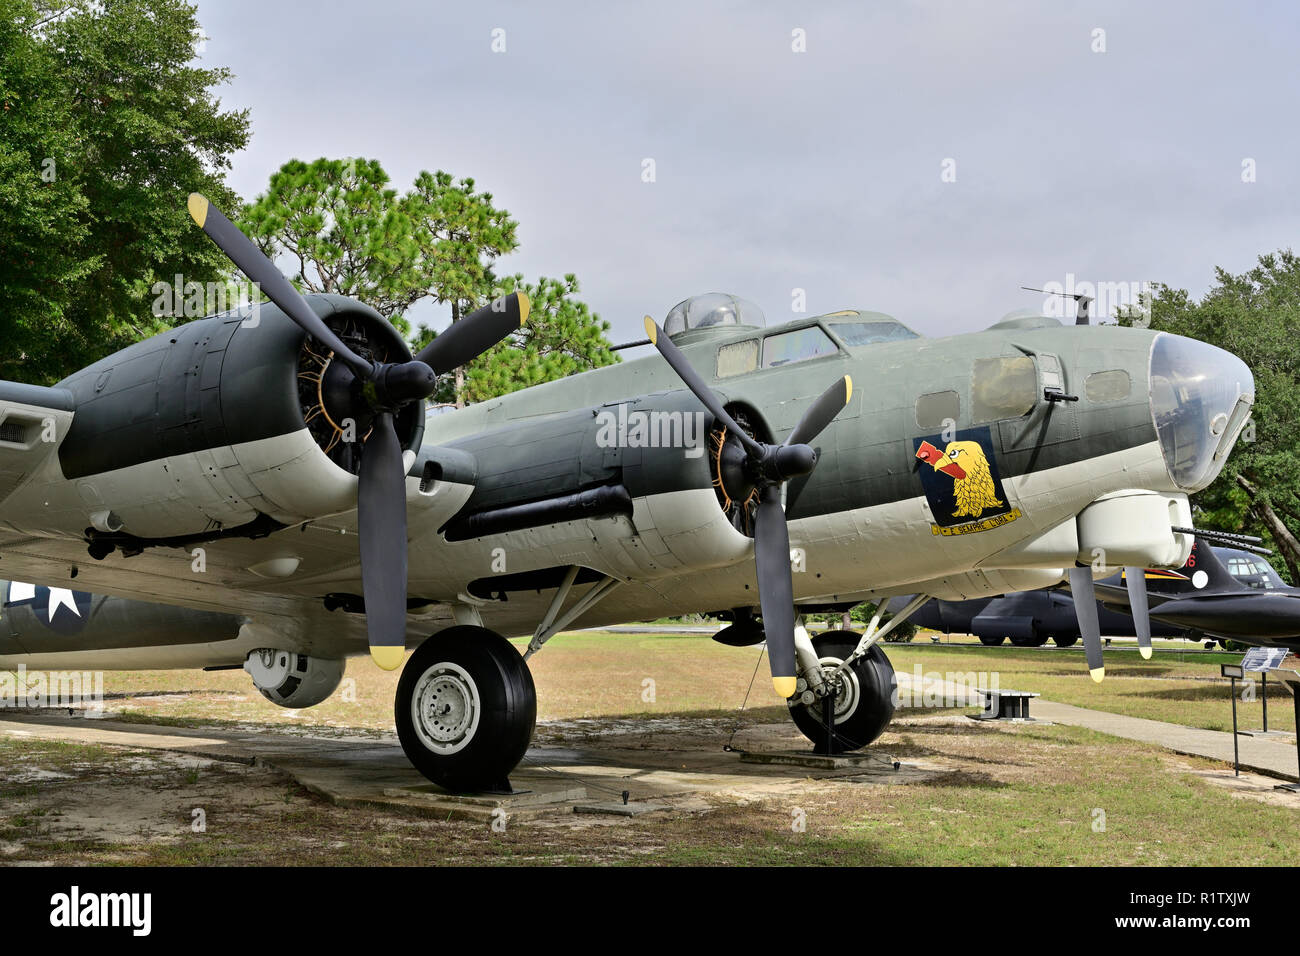 B-17 Flying Fortress a WWII or World War II heavy bomber on static display at the outdoor museum, Eglin AFB, Fort Walton Beach Florida, USA. Stock Photo